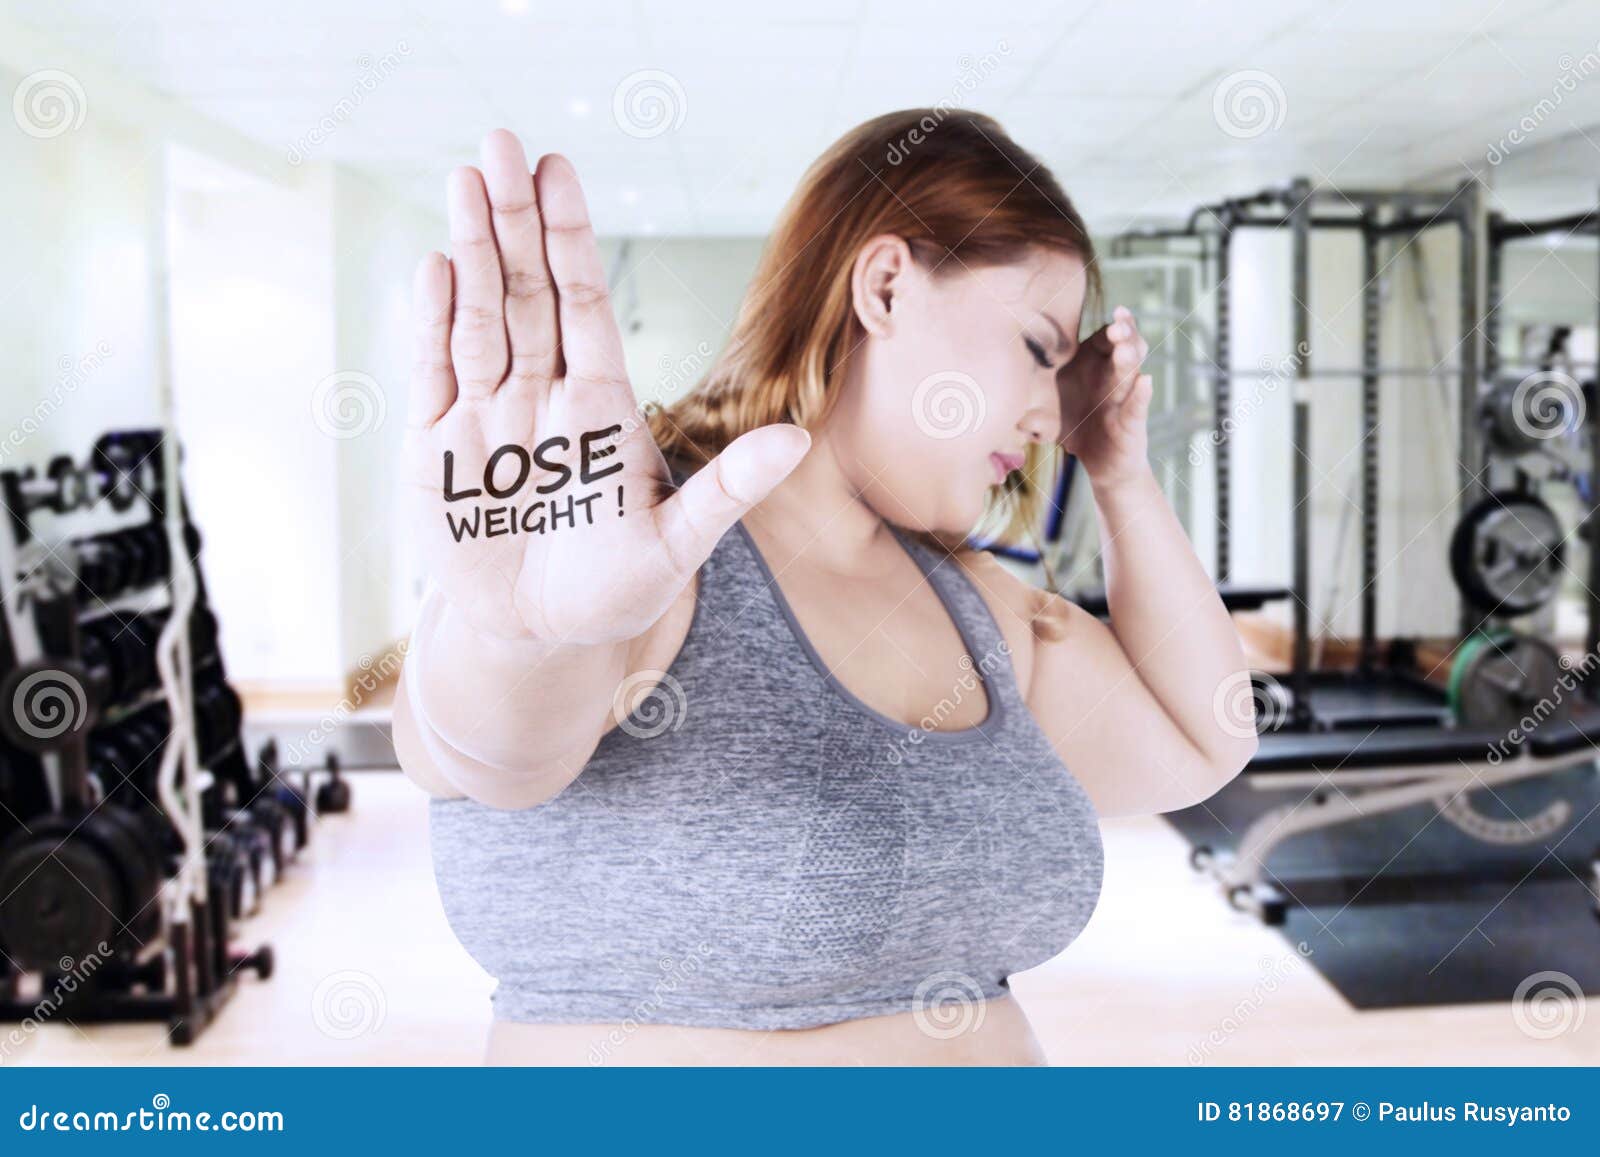 Obese Woman Shows Lose Weight On Hand Stock Image Image